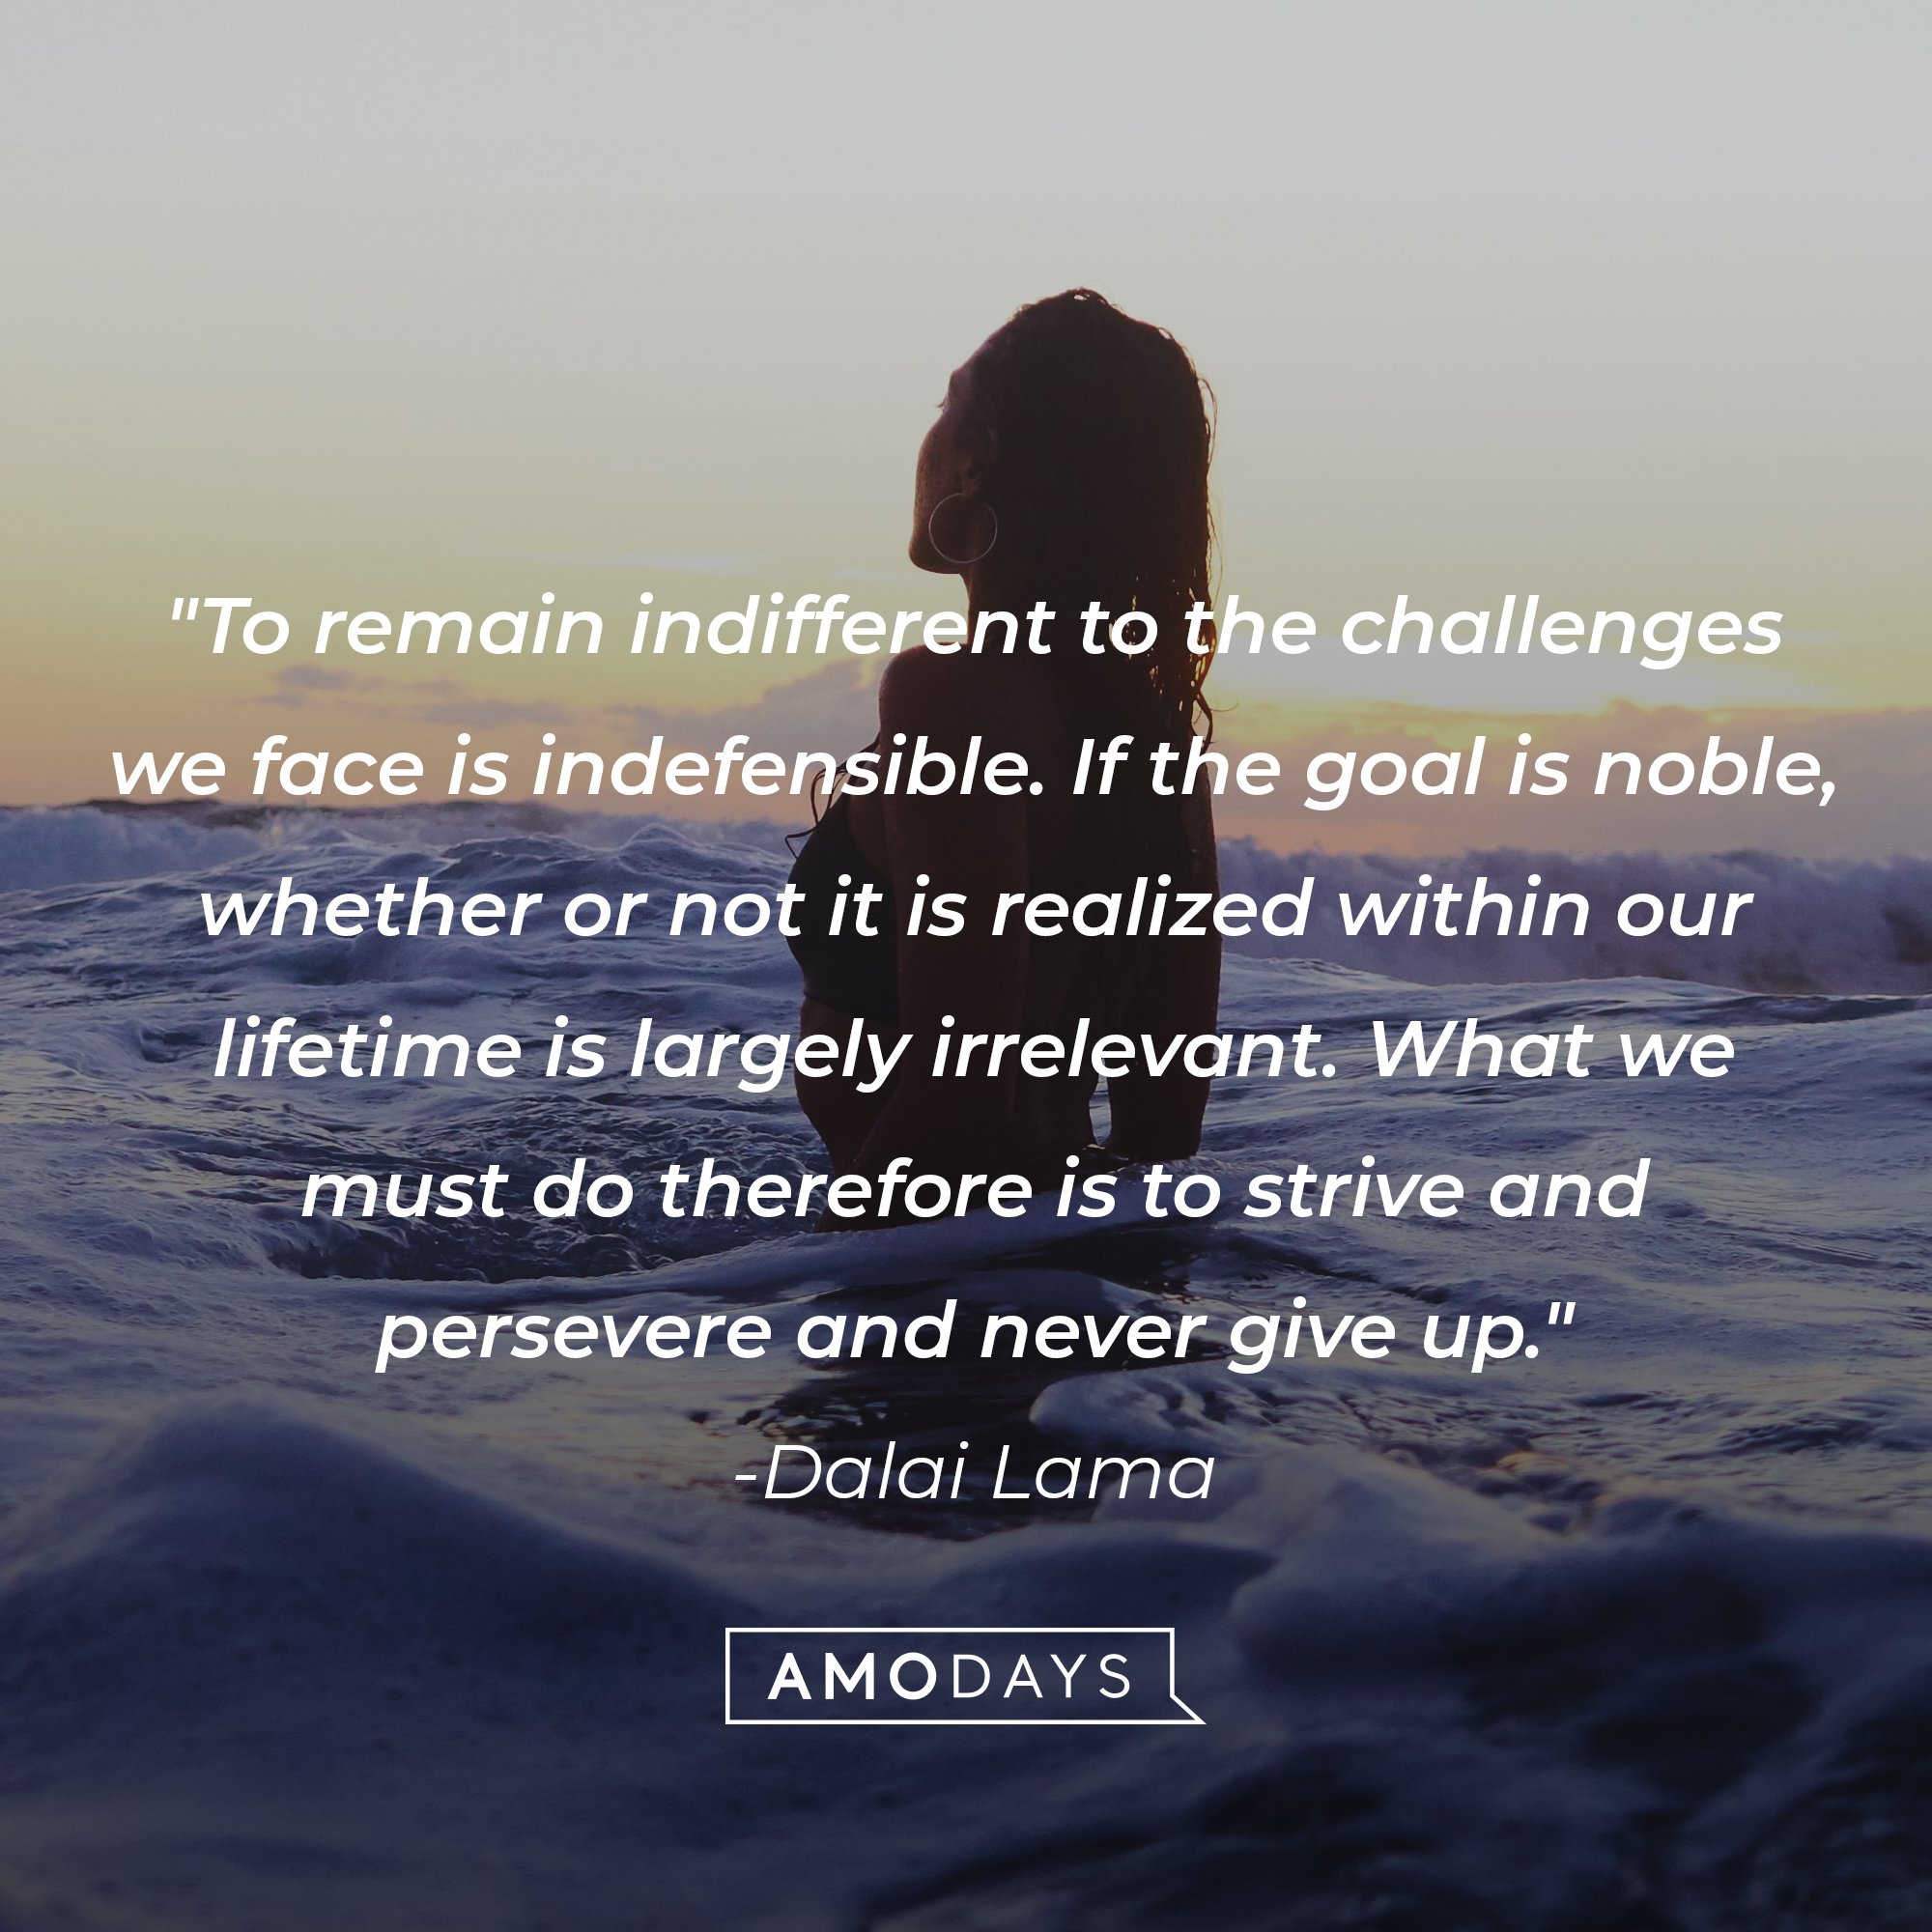 Dalai Lama's quote: "To remain indifferent to the challenges we face is indefensible. If the goal is noble, whether or not it is realized within our lifetime is largely irrelevant. What we must do therefore is to strive and persevere and never give up." | Image: AmoDays